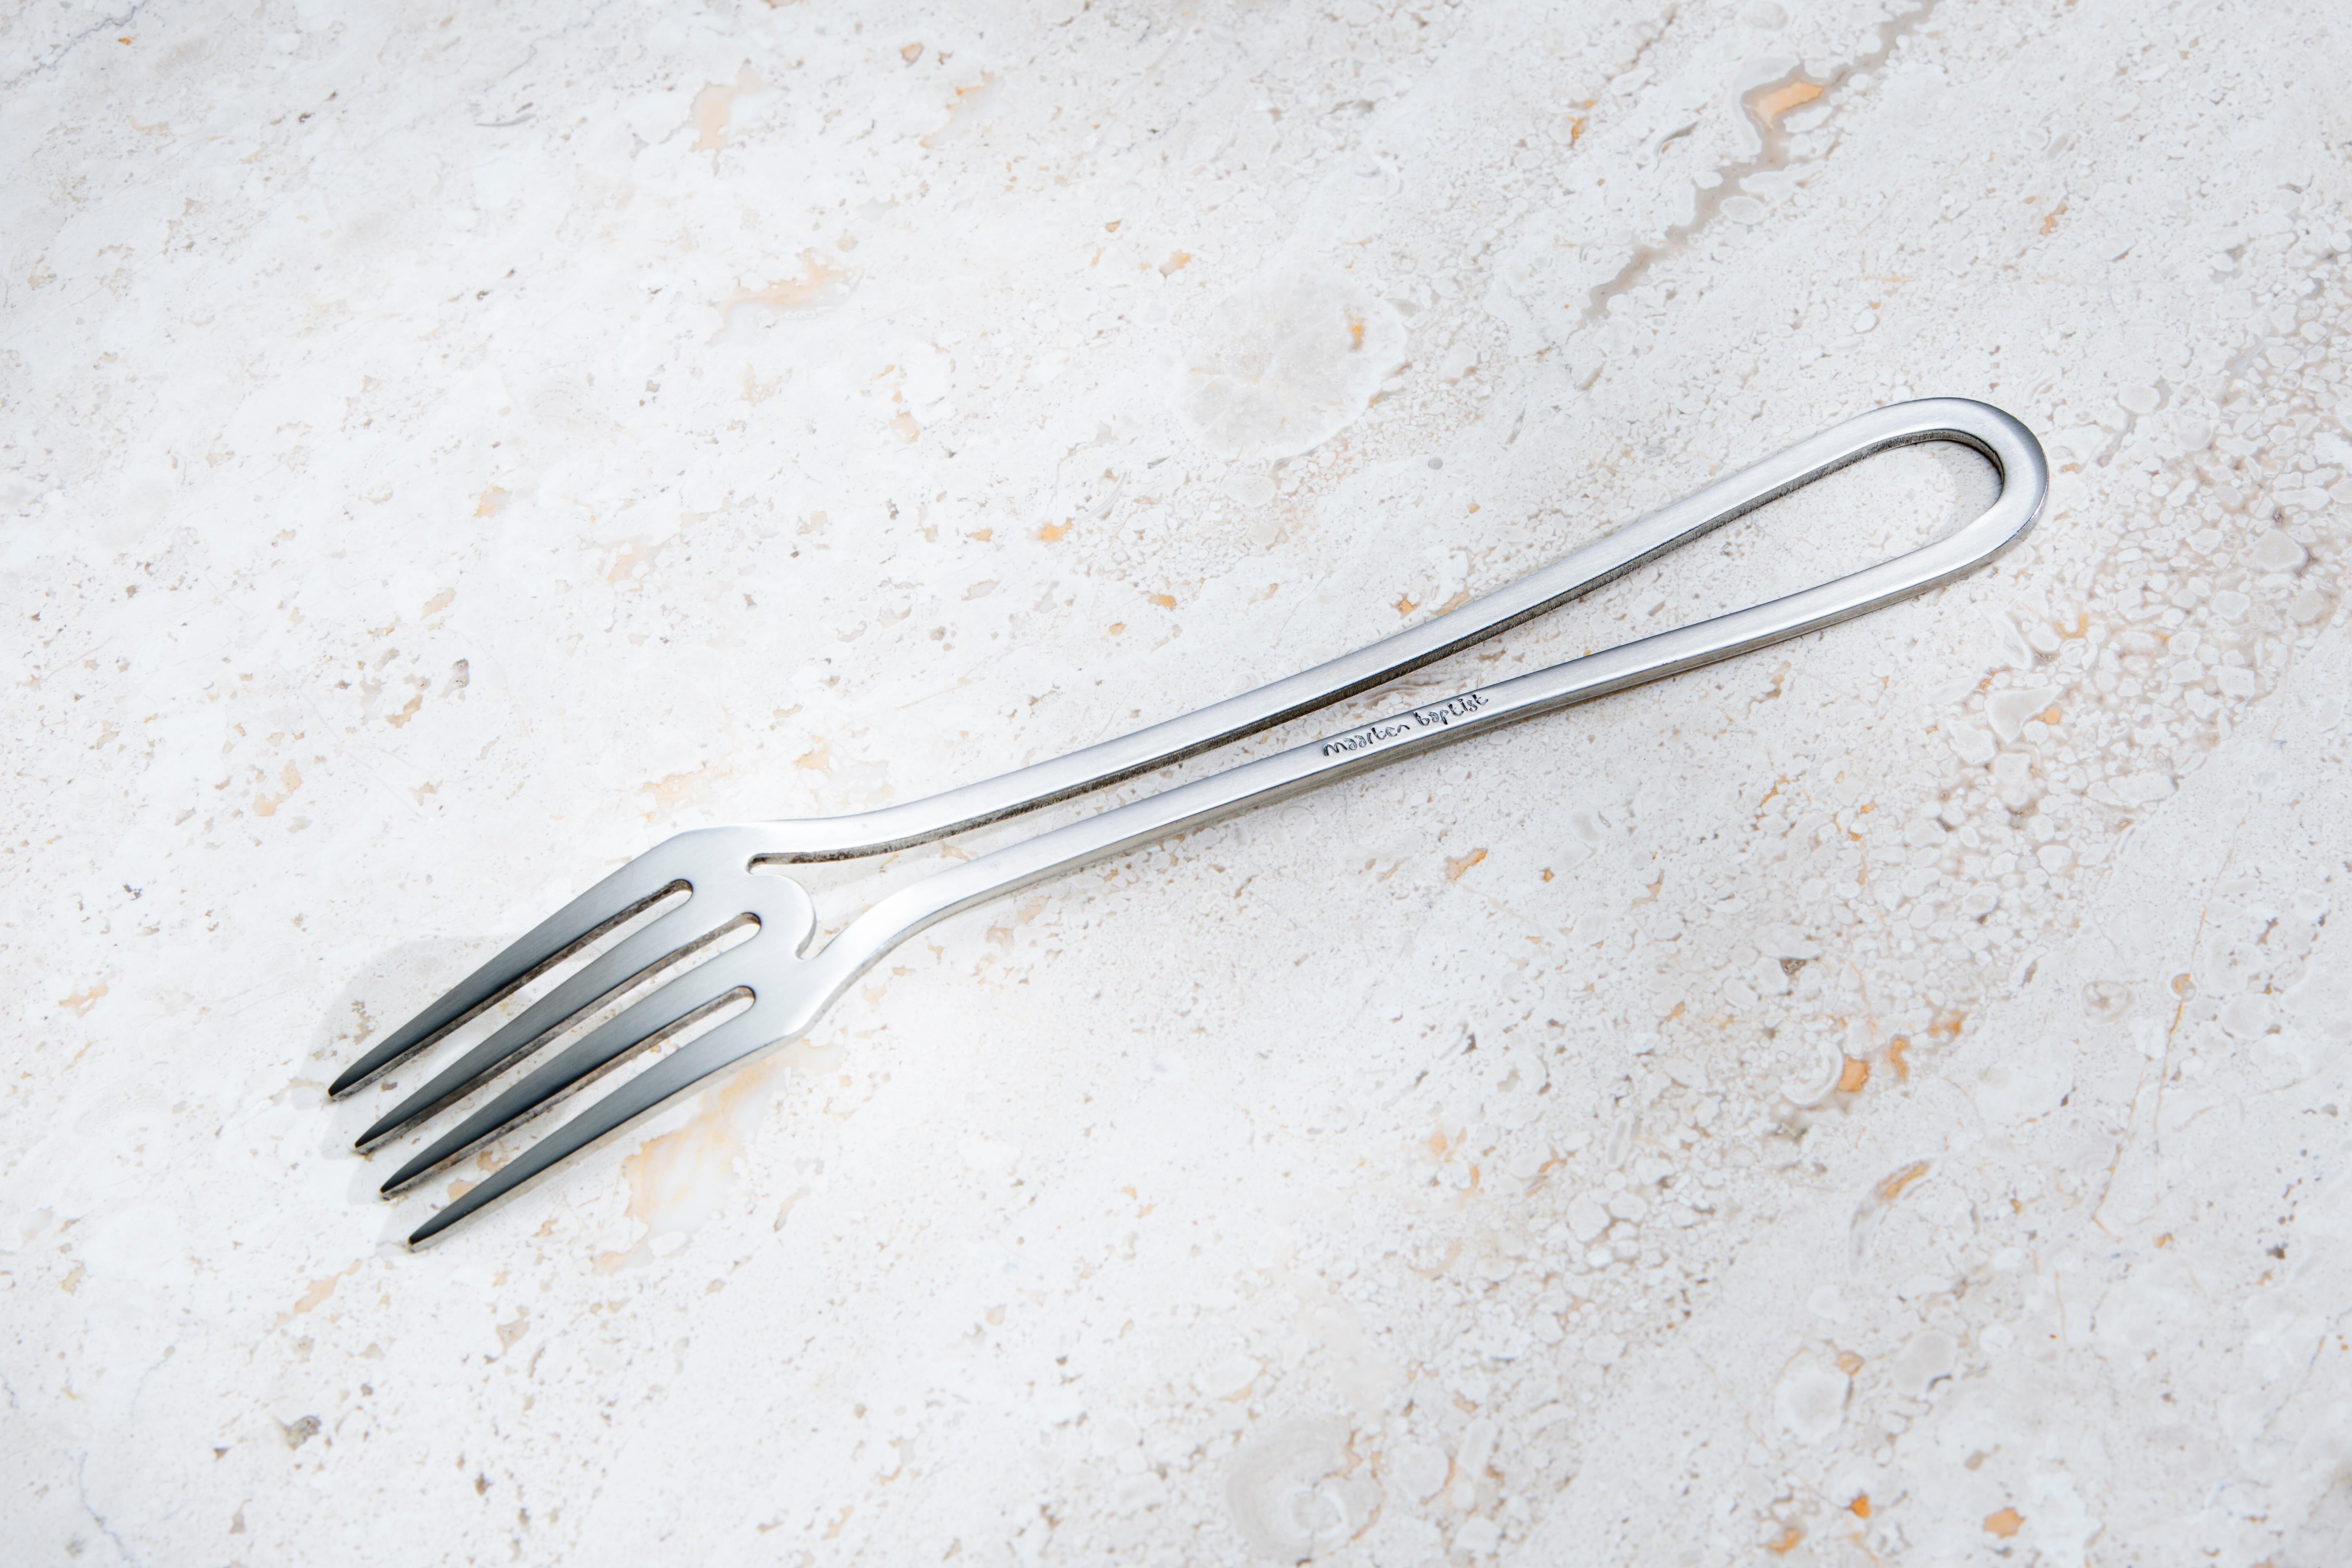 48 Pices Outline Cutlery Set by Maarten Baptist 2